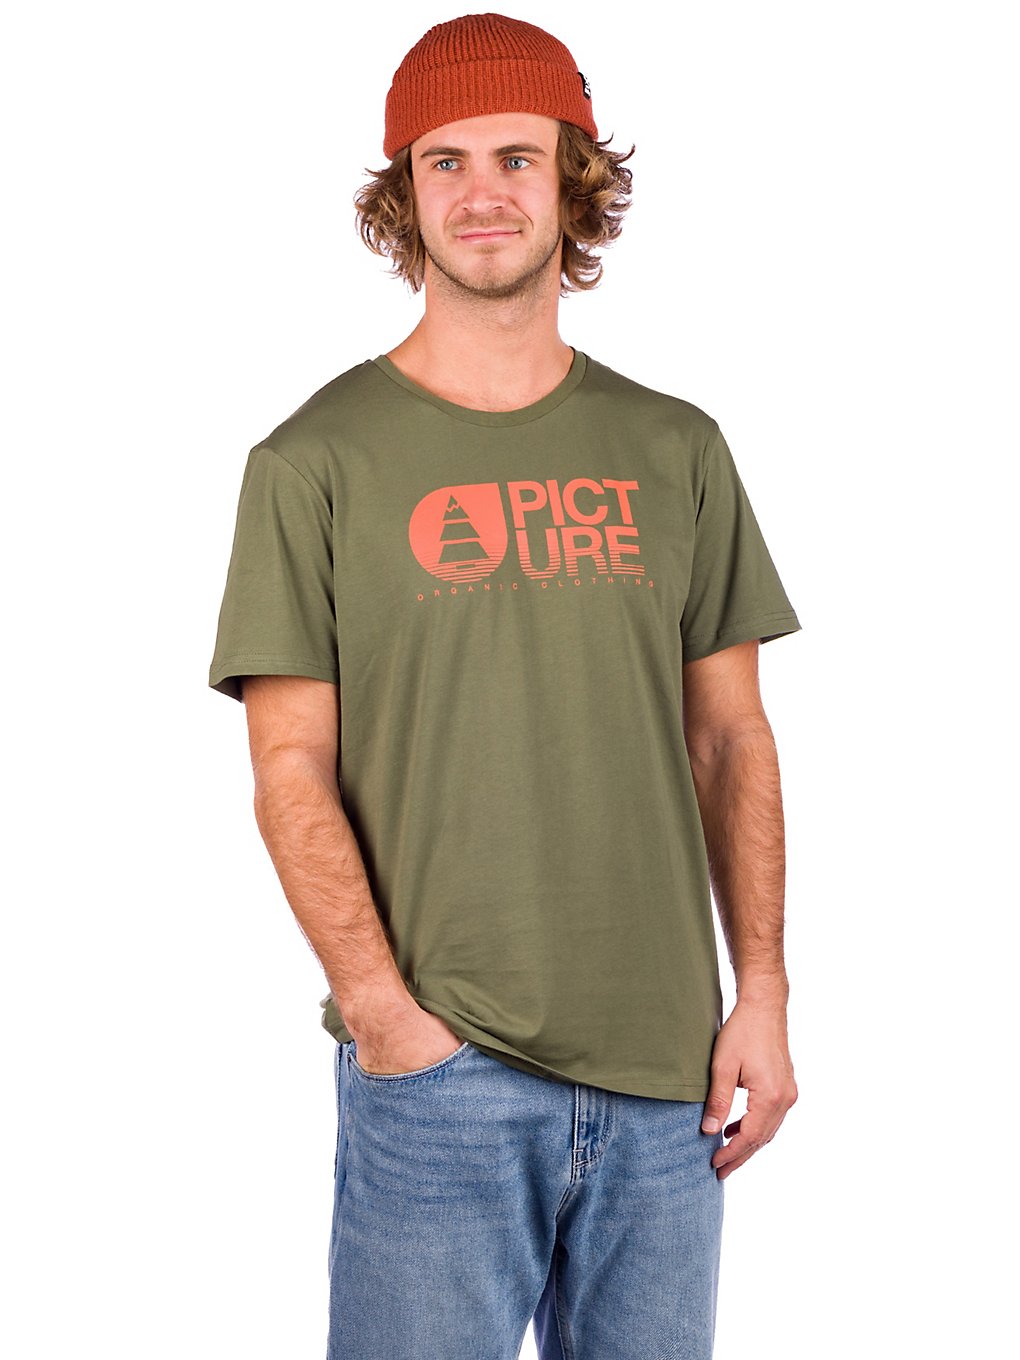 Picture Basement Dusk T-Shirt army green